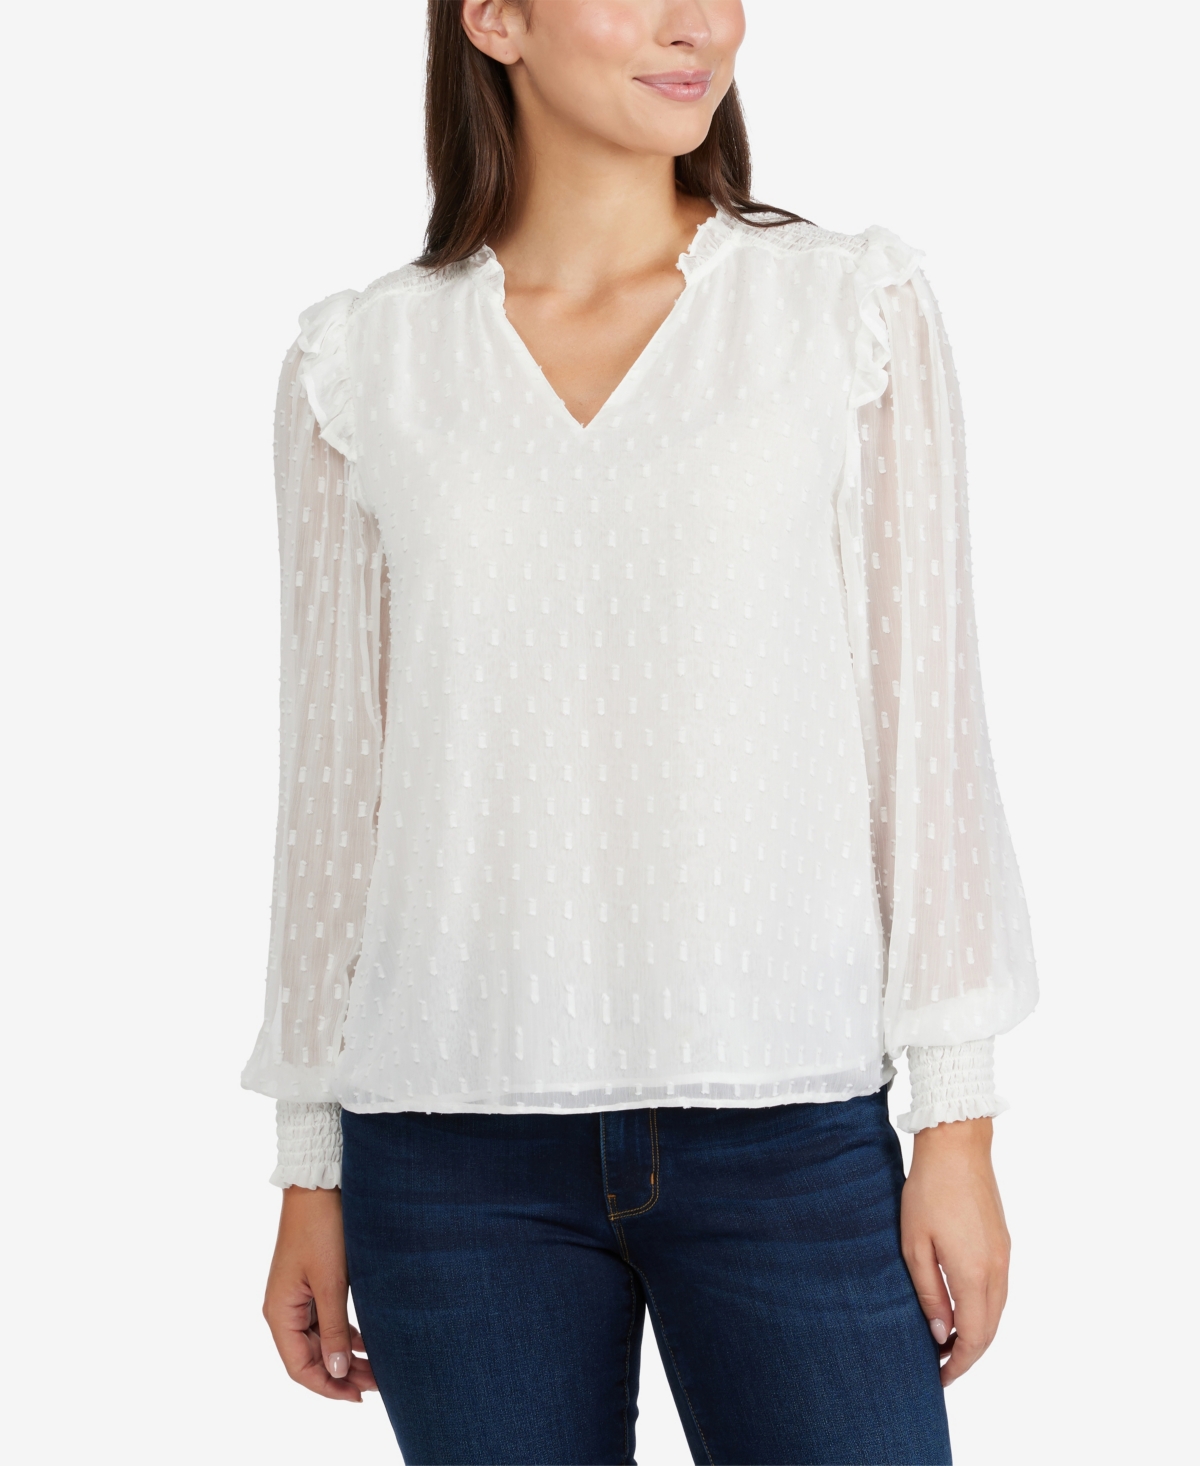 LAUNDRY BY SHELLI SEGAL WOMEN'S RUFFLE SLEEVE TOP WITH SMOCKED DETAIL